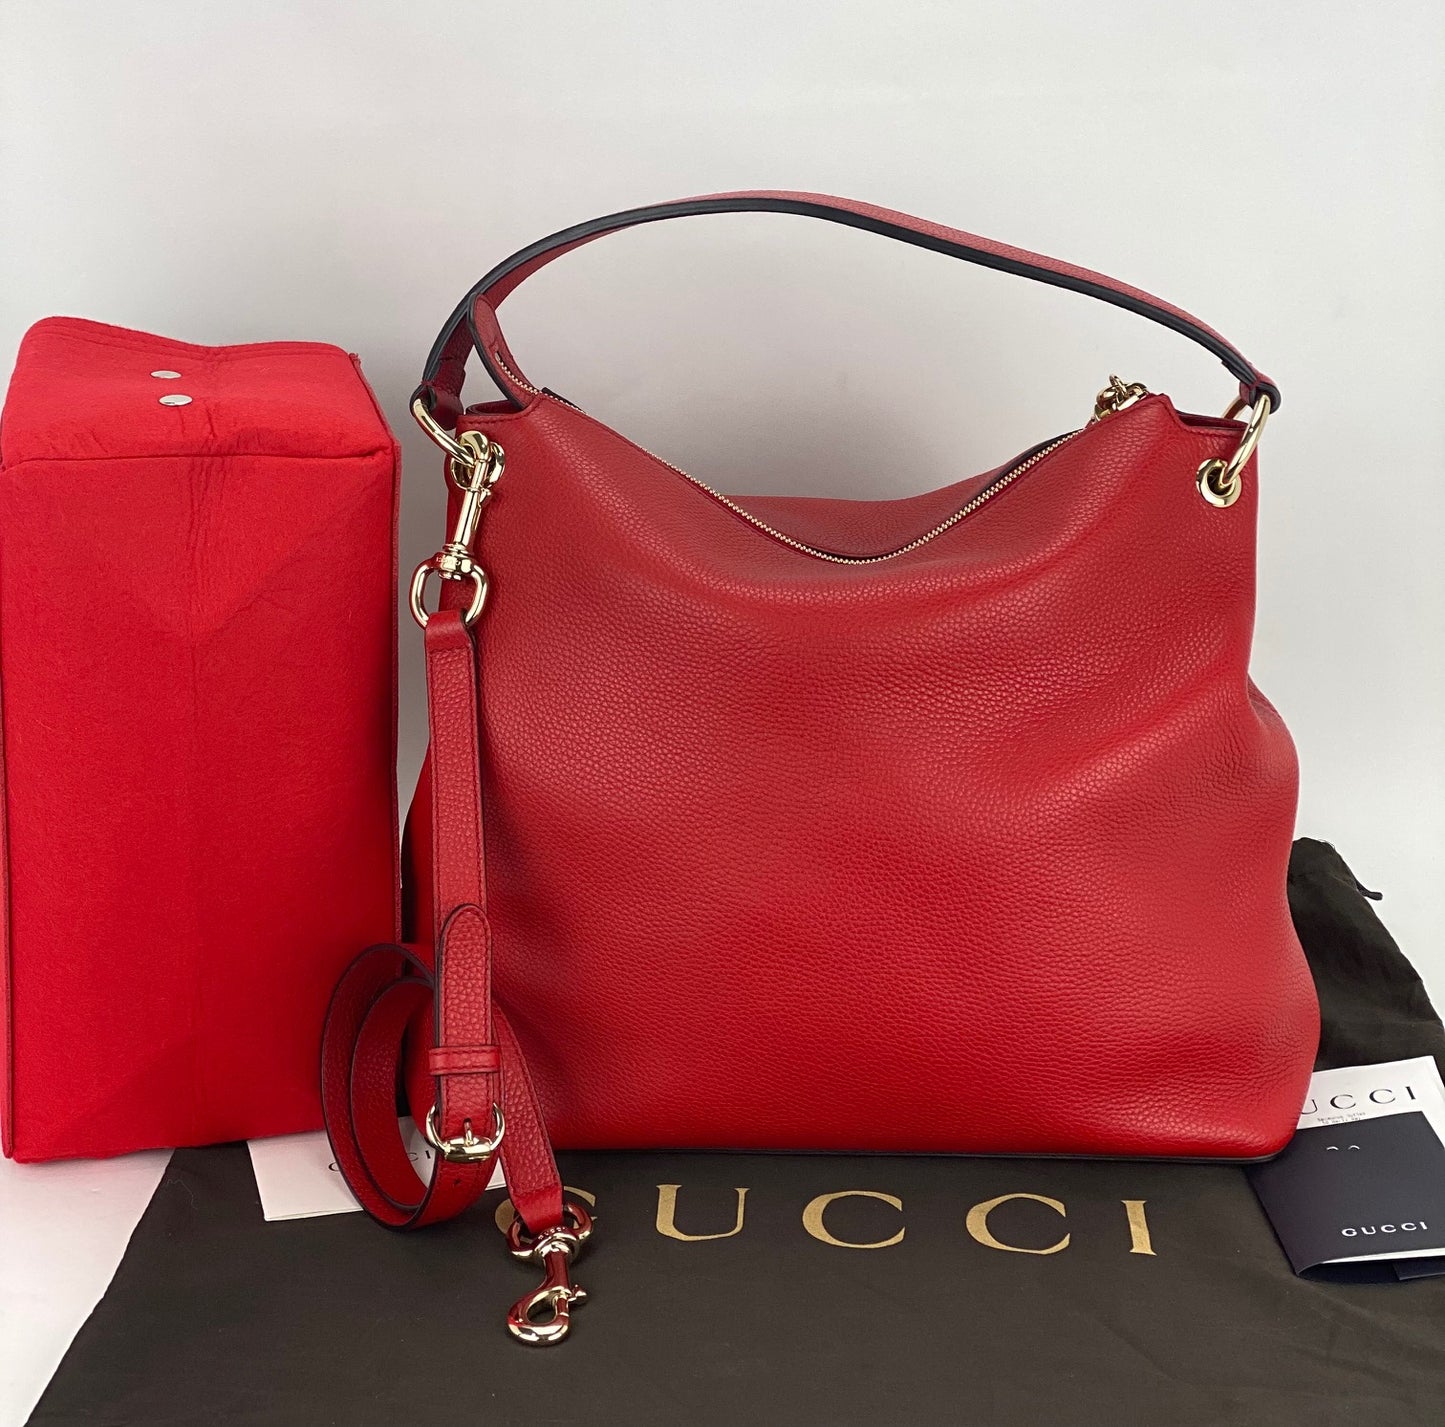 Gucci - Authenticated Soho Handbag - Leather Red for Women, Very Good Condition